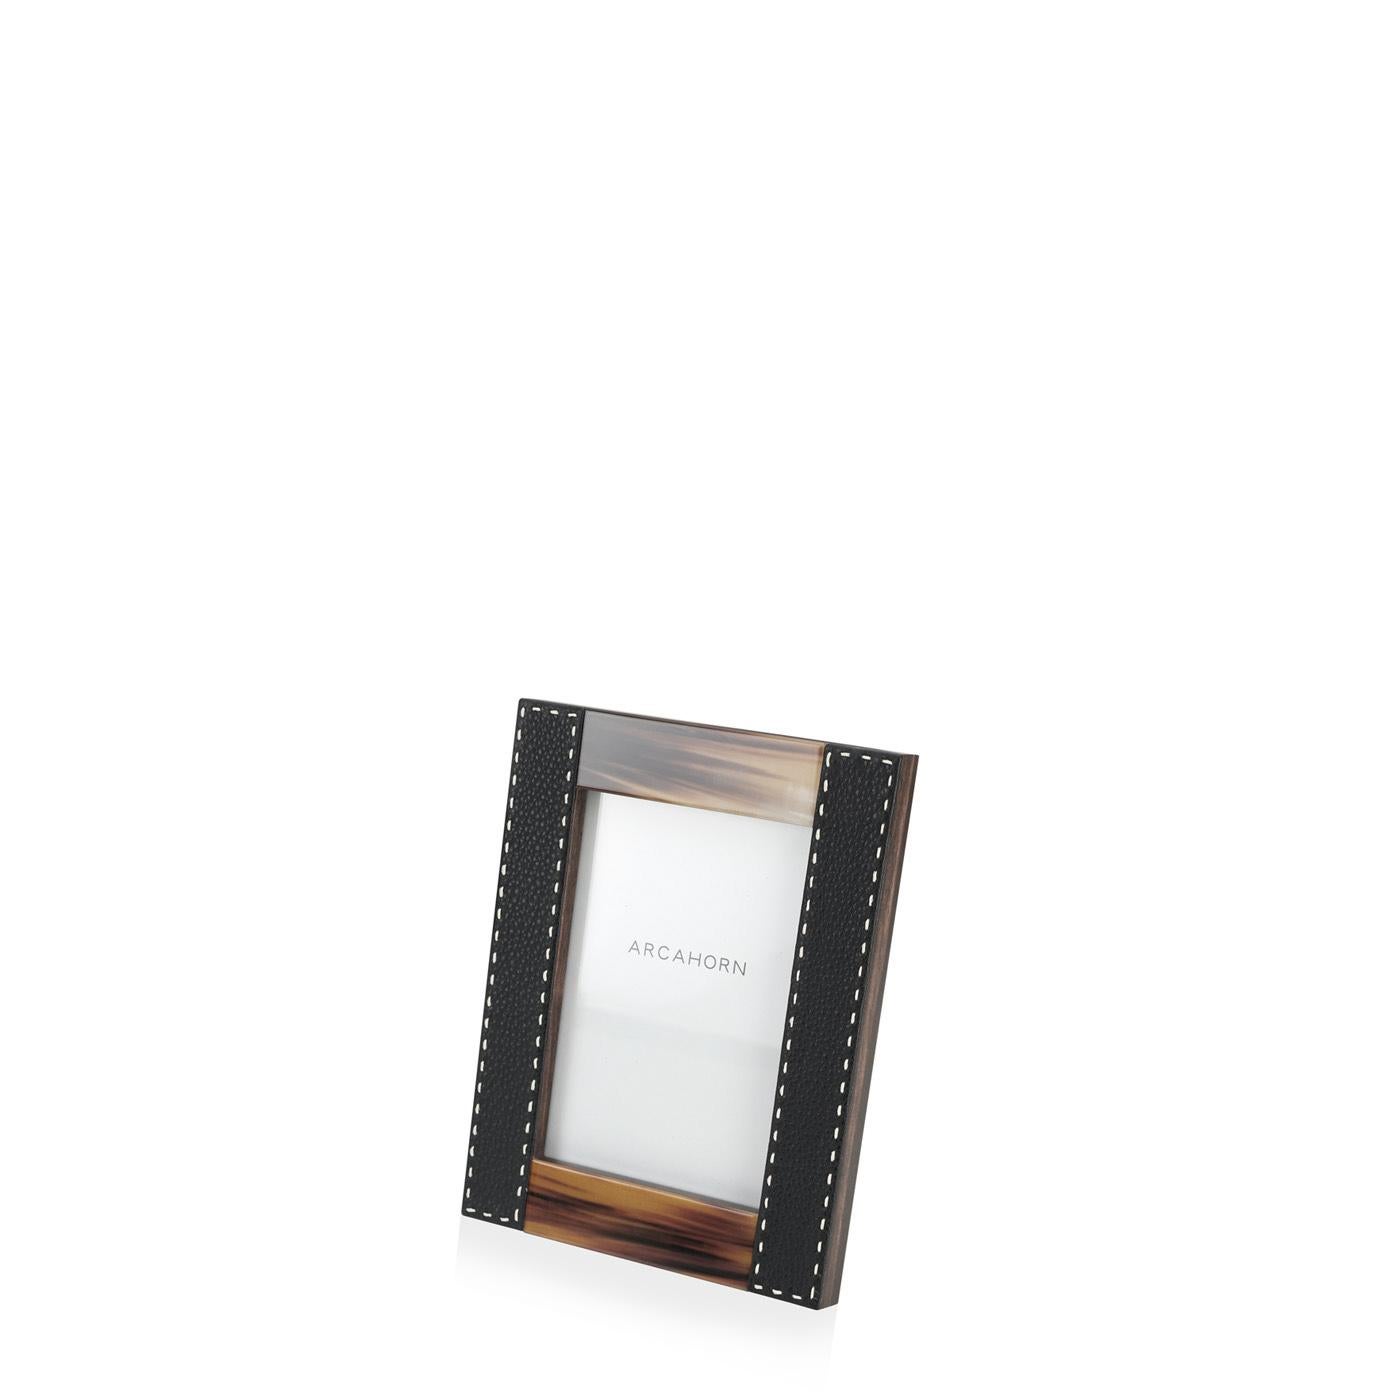 Artisan crafted using traditional techniques, our Dorotea picture frame sports unique features. Covered in Aida pebbled leather, proposed in a neutral Onyx colour, the design is further enhanced by hand-made stitching in a contrasting cream colour.